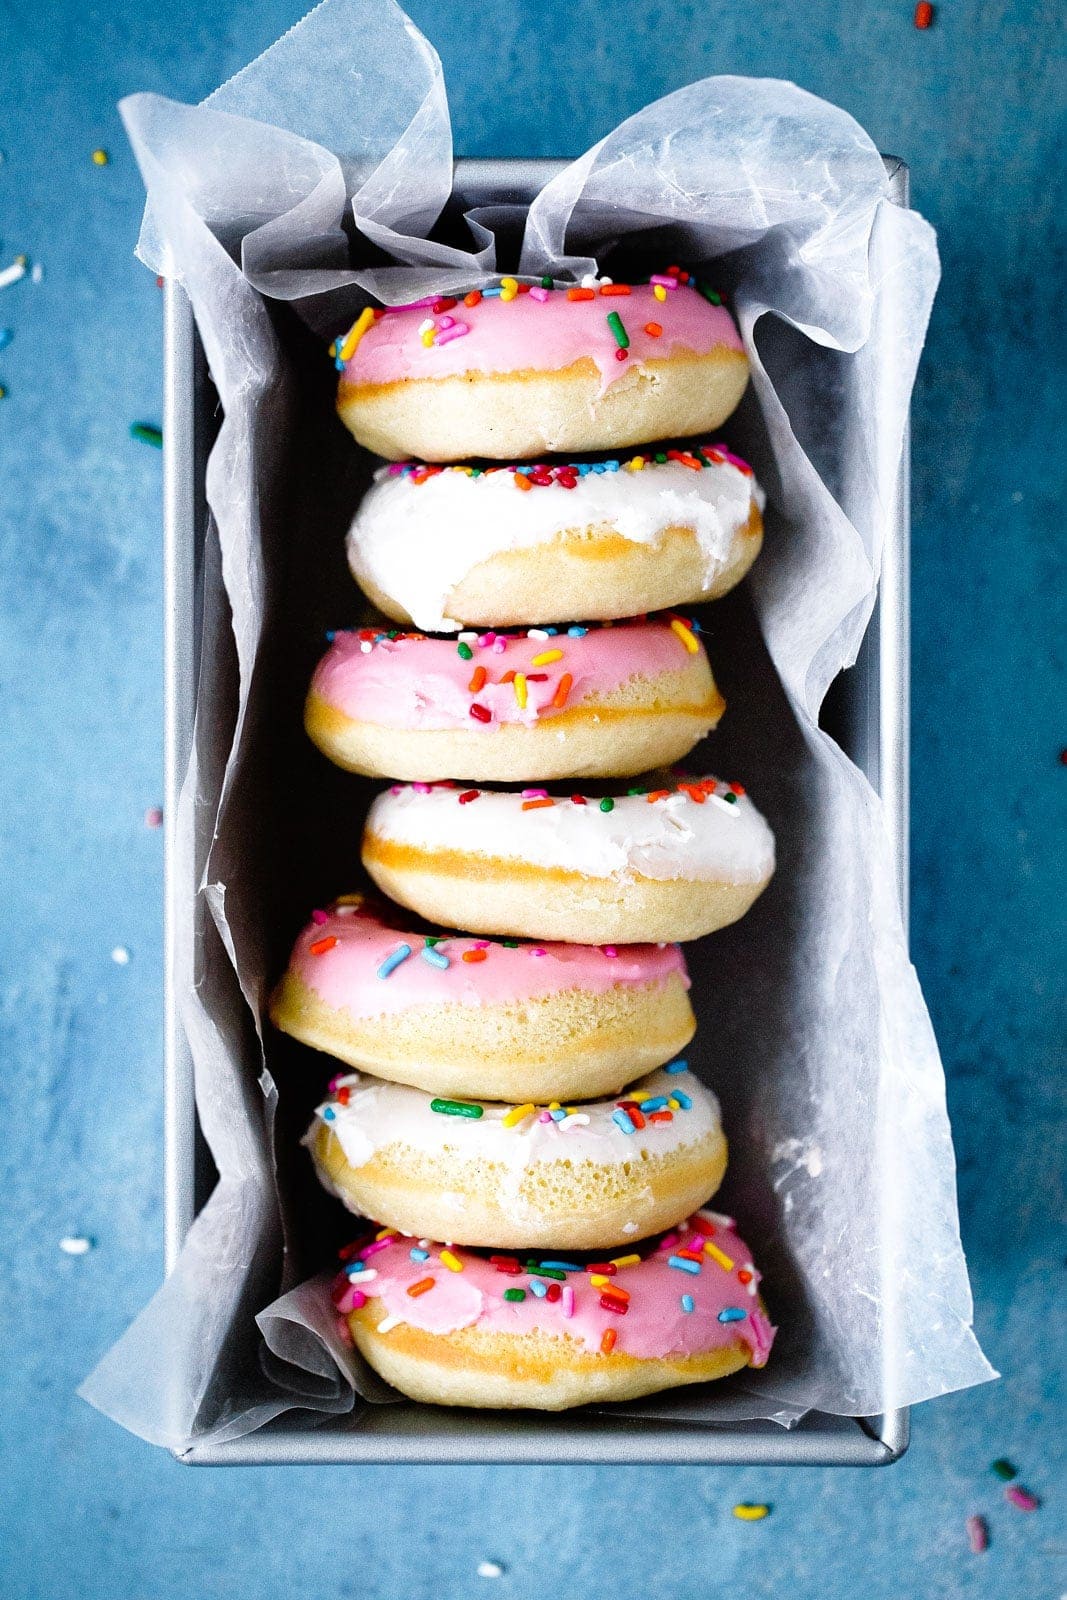 Frosted Sugar Cookie Donuts aka donuts that taste like classic frosted sugar cookies. AND THERE'S SPRINKLES.